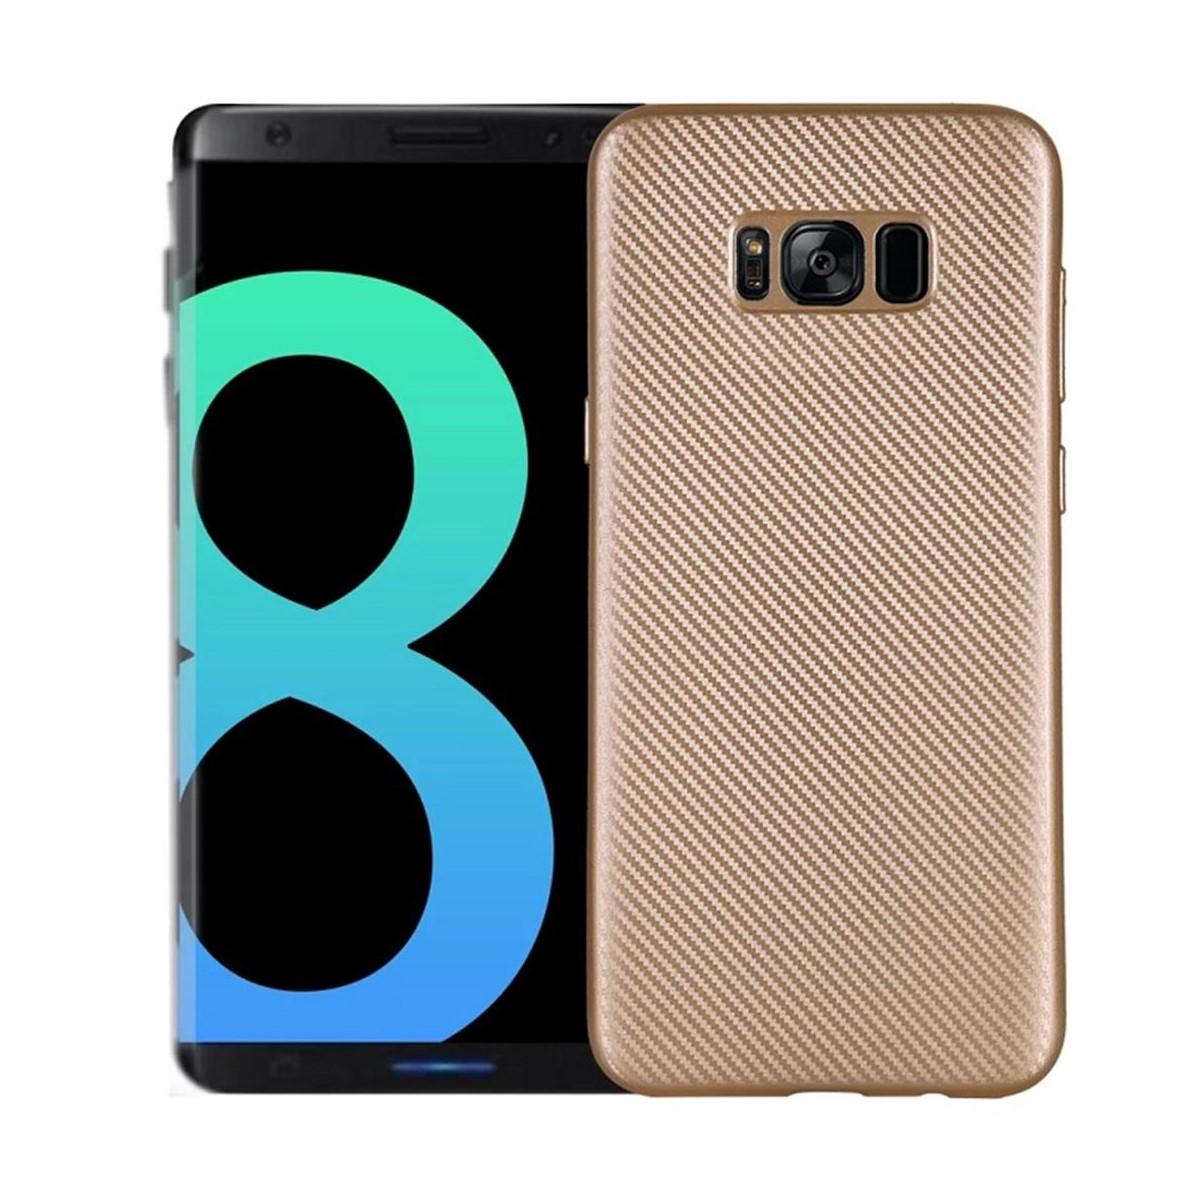 Handycase Backcover, Look, Samsung, Gold Galaxy S8 Plus, Carbon im COVERKINGZ